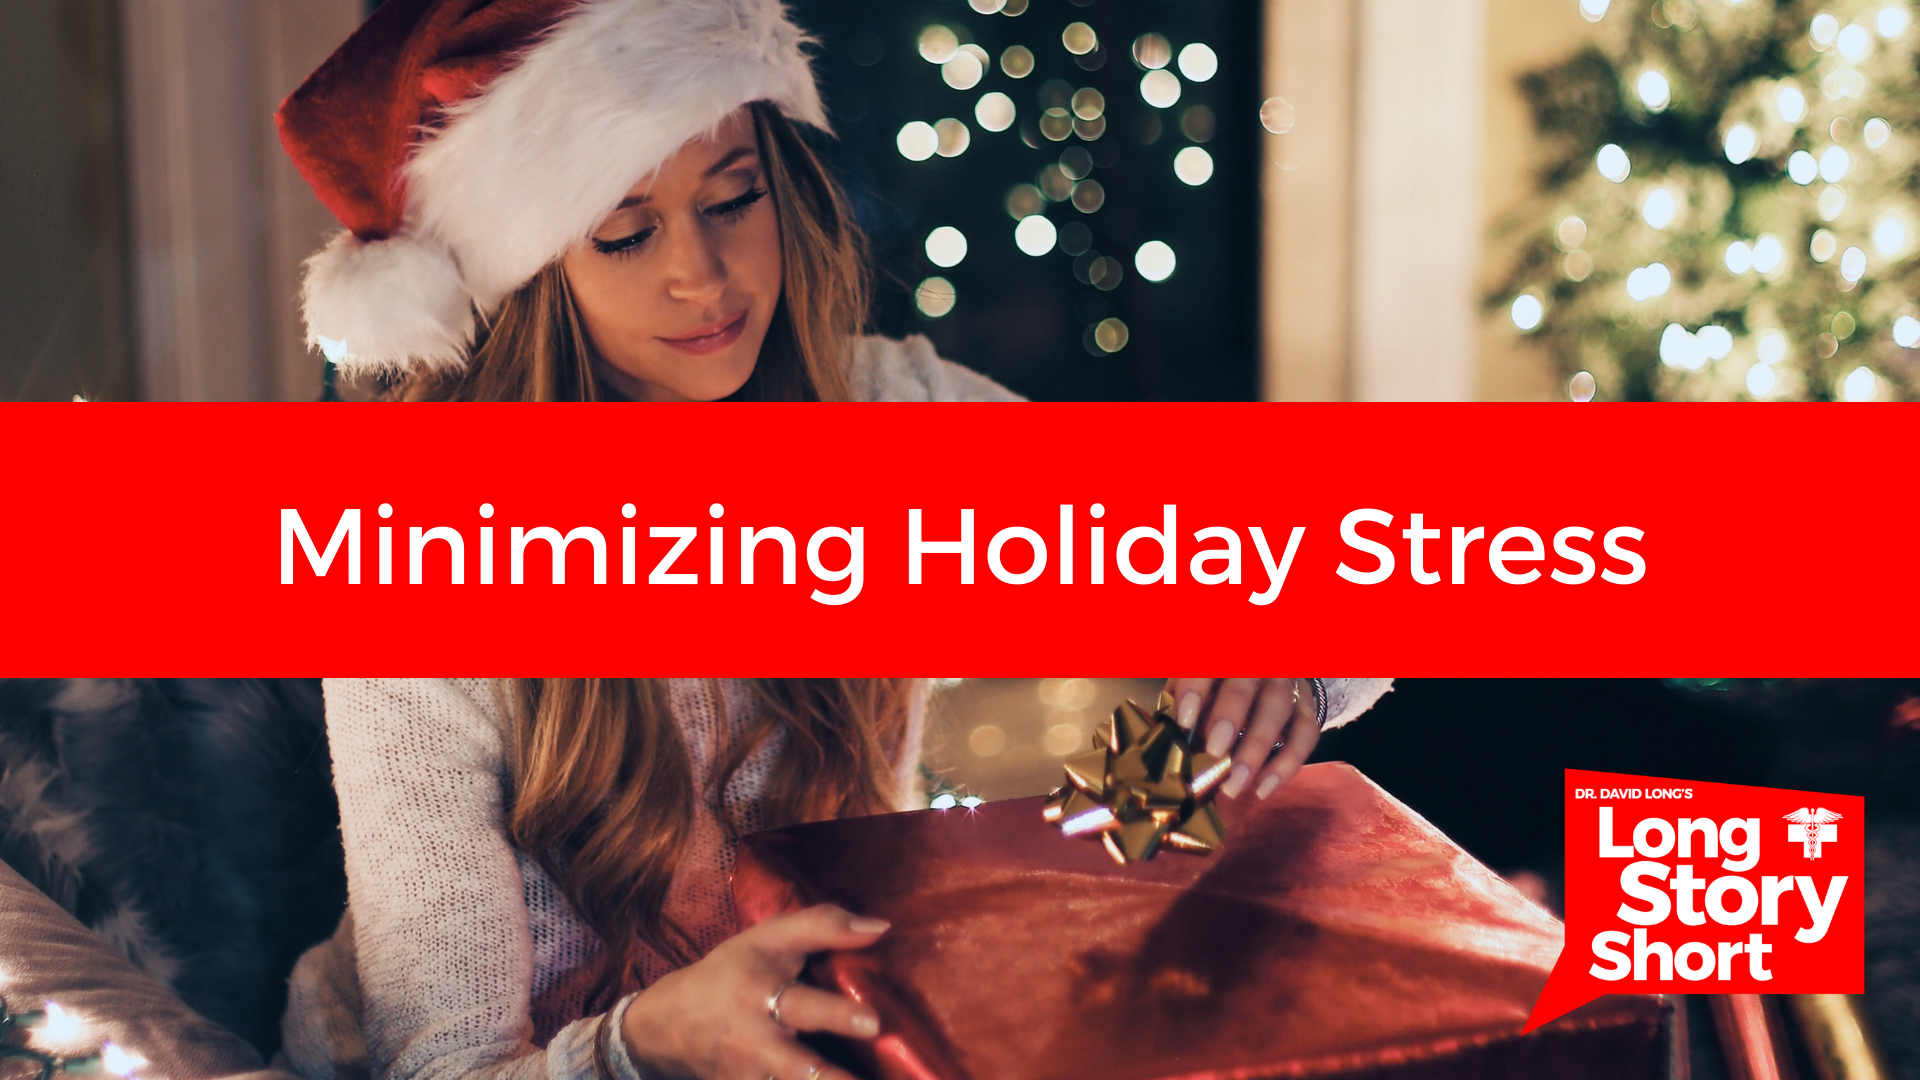 You are currently viewing Minimizing Holiday Stress – Dr. David Long